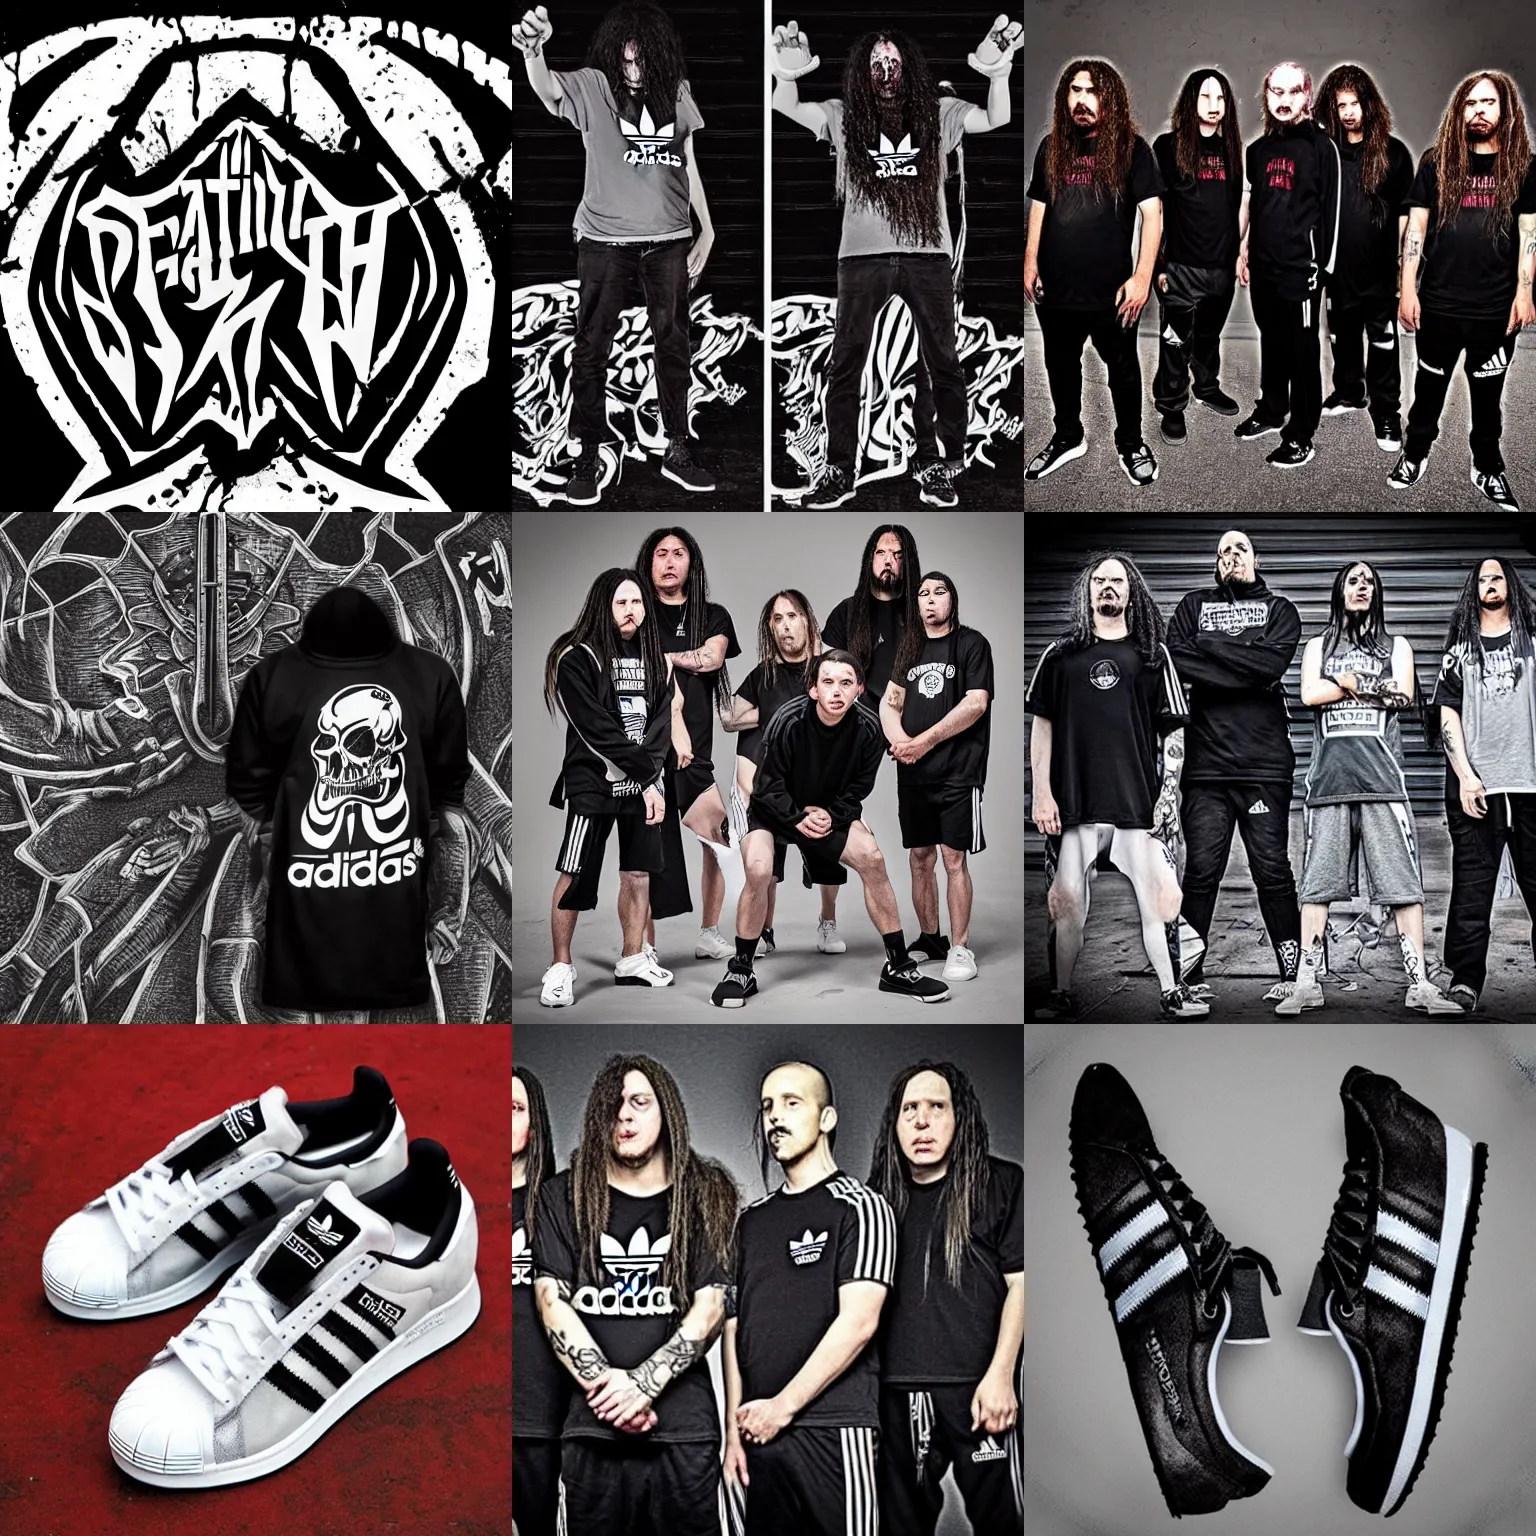 Prompt: adidas death metal band